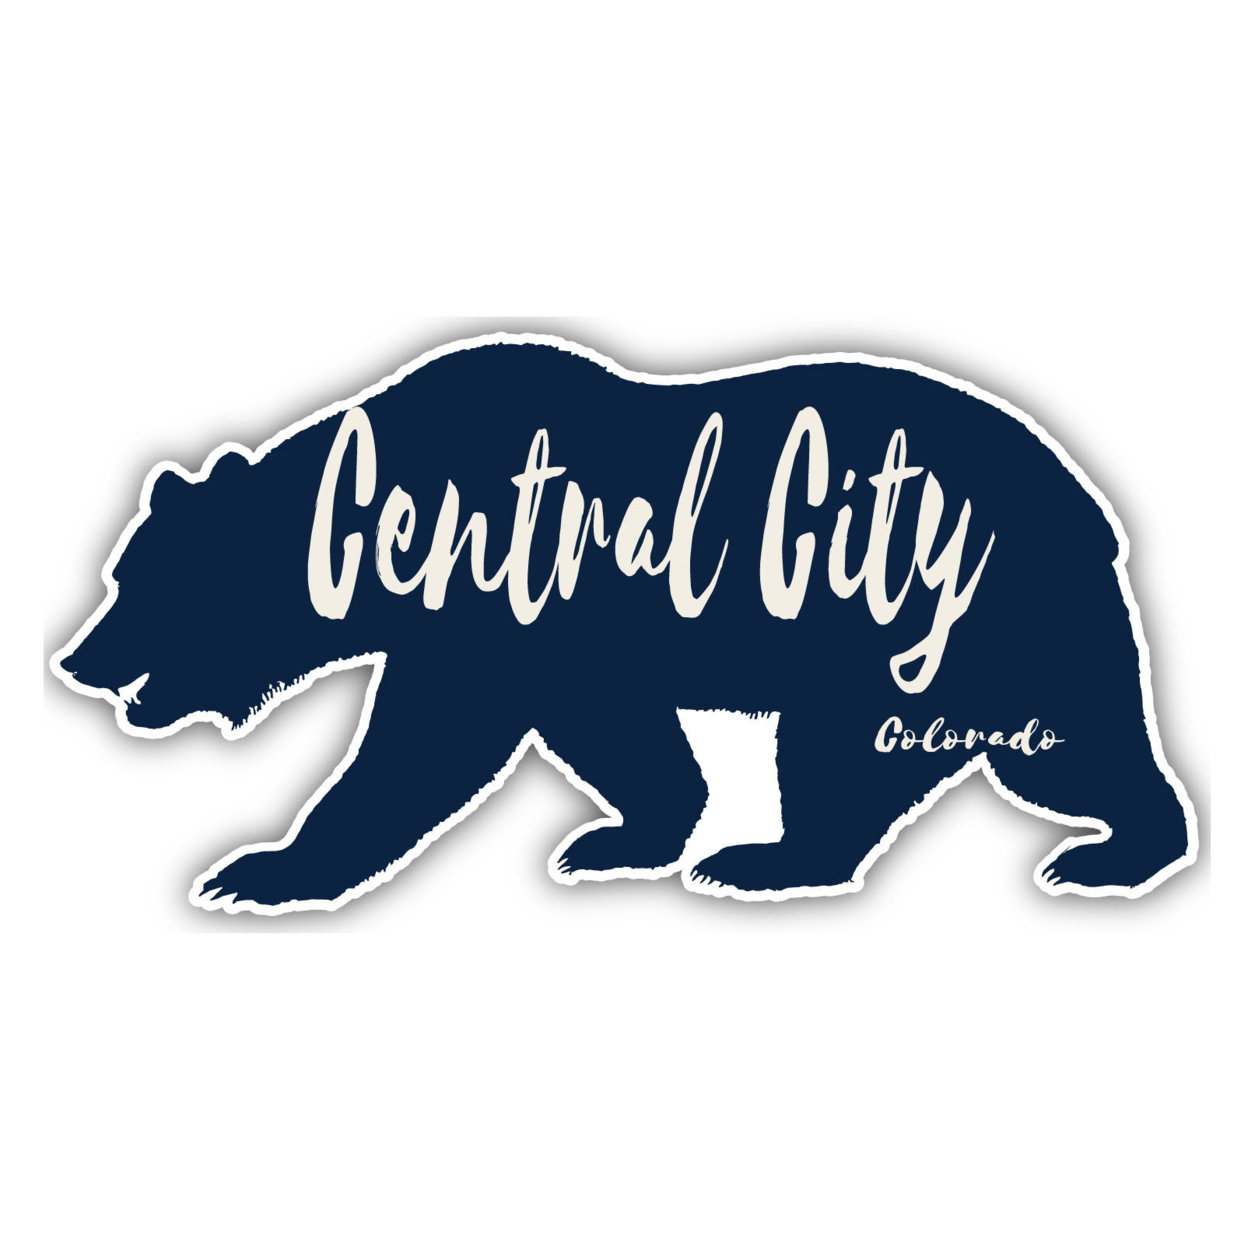 Central City Colorado Souvenir Decorative Stickers (Choose Theme And Size) - 4-Pack, 8-Inch, Bear